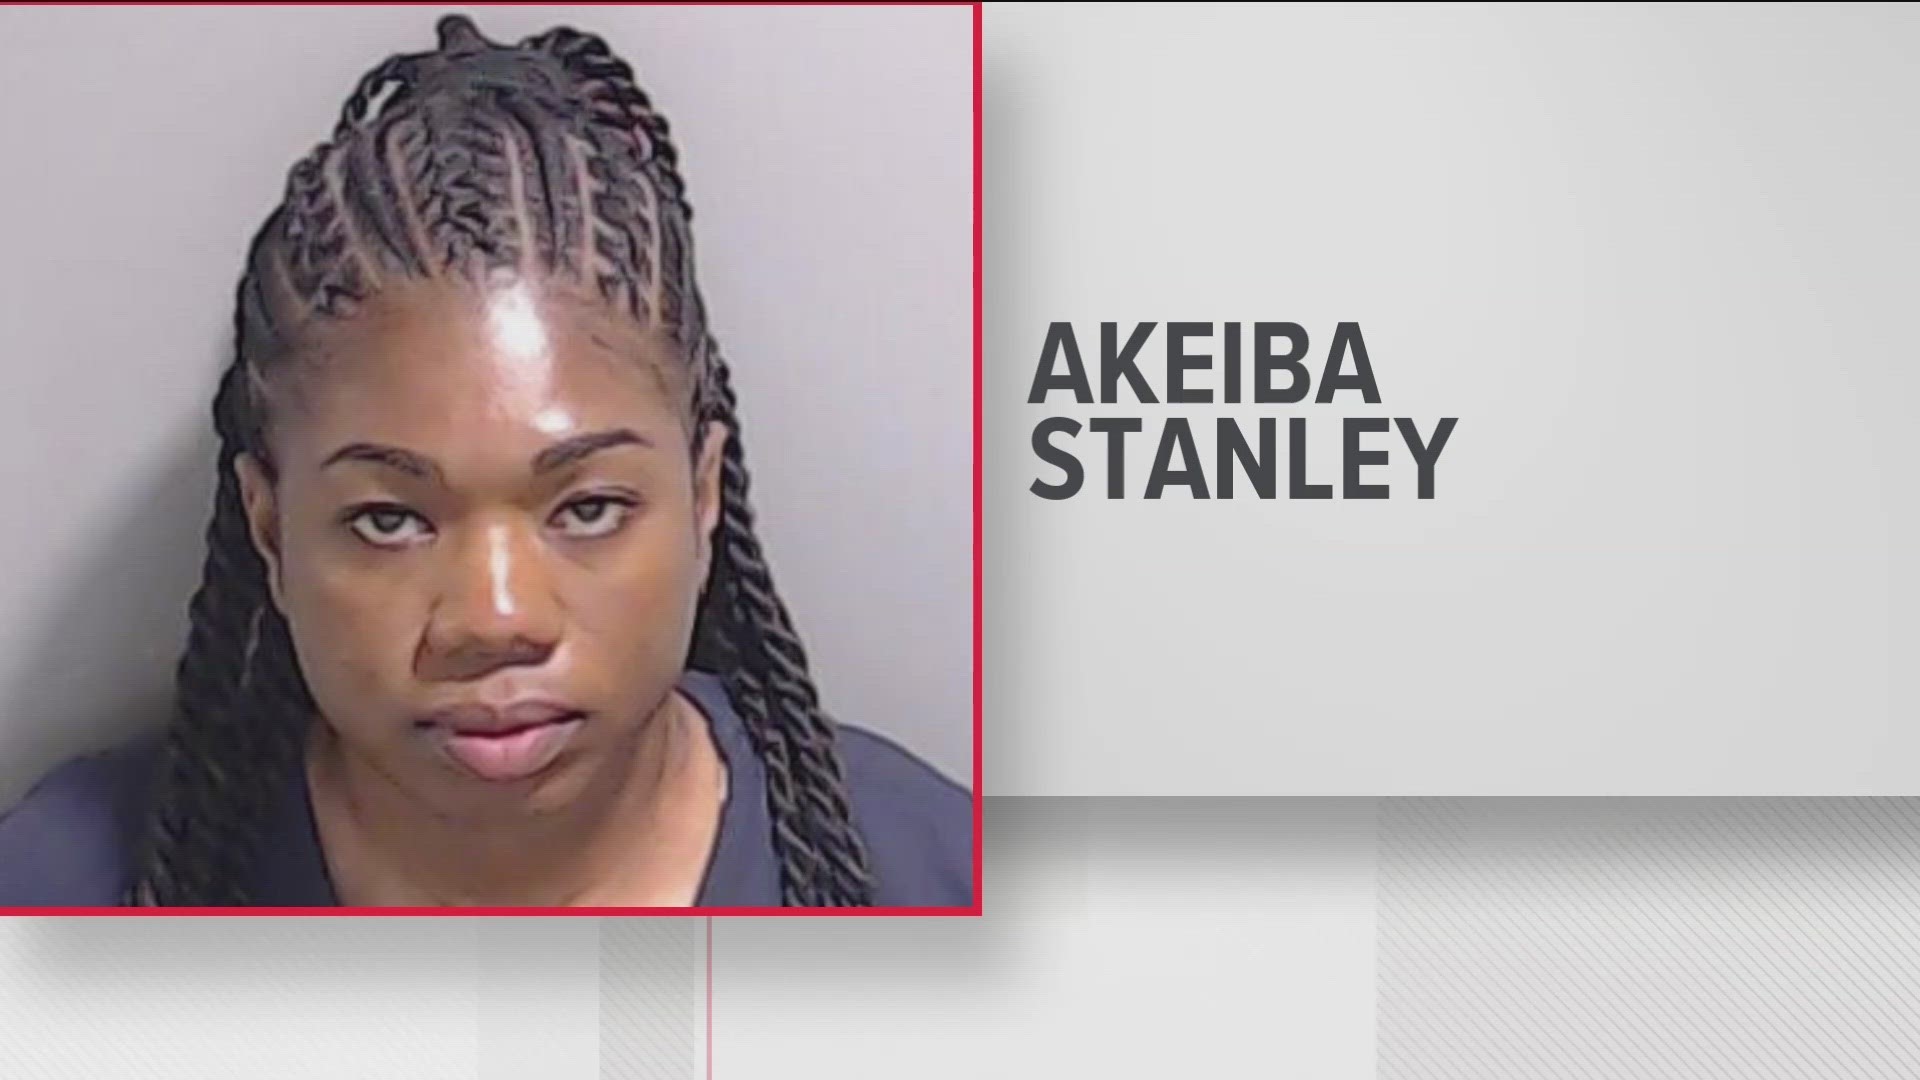 Additionally, Akeiba Stanley opted to waive her first court appearance that was originally scheduled for Saturday morning.